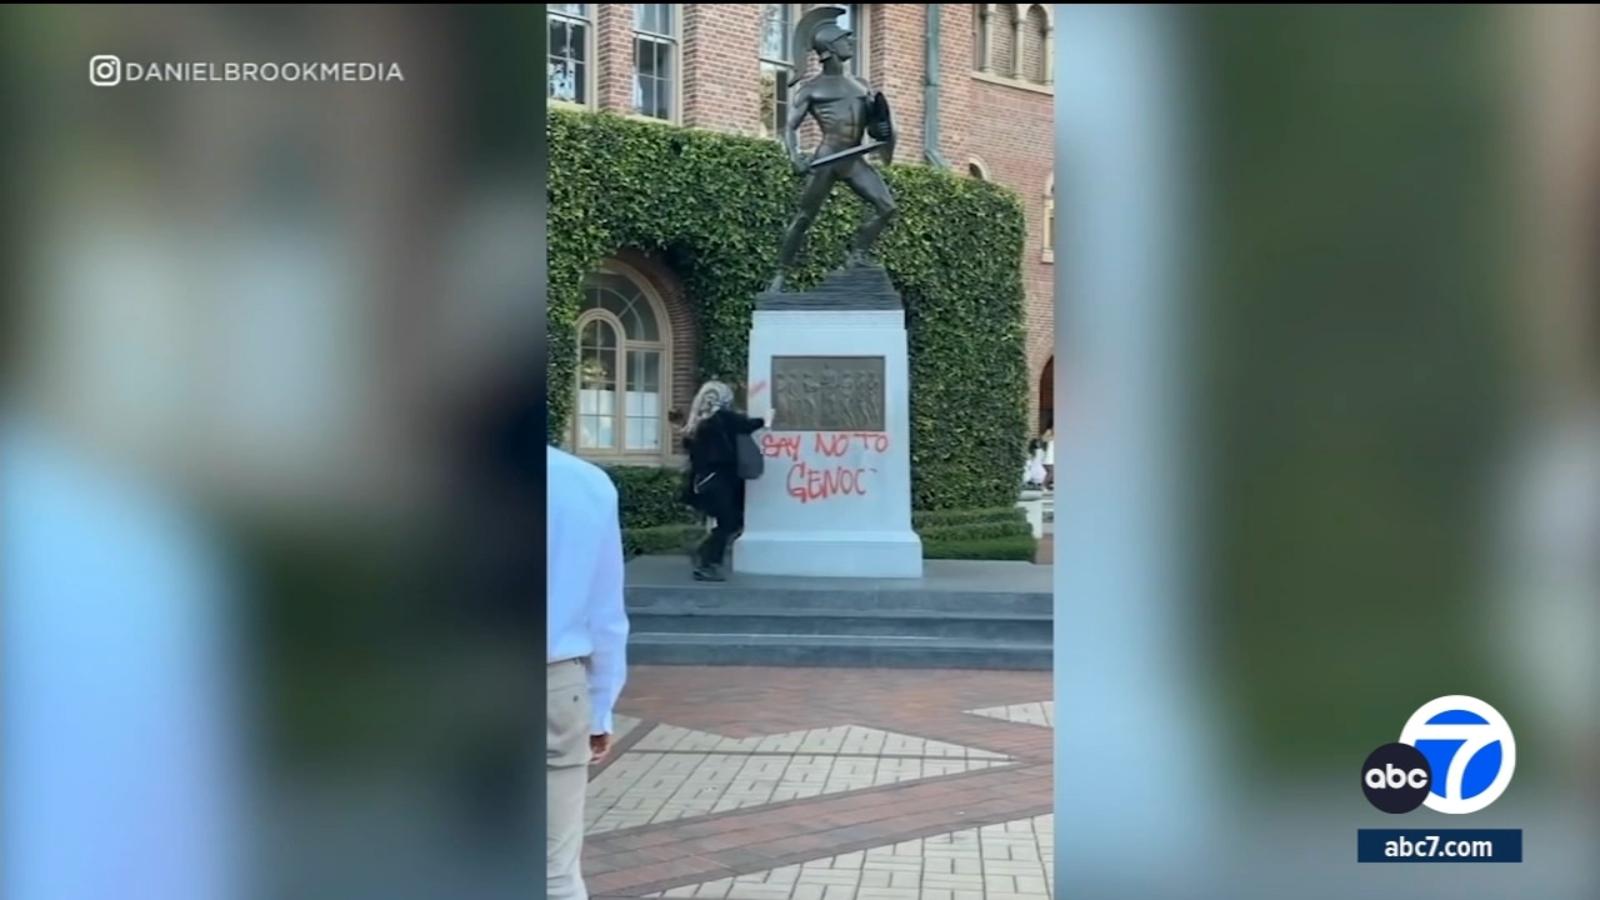 There are pro-Palestinian demonstrators at USC